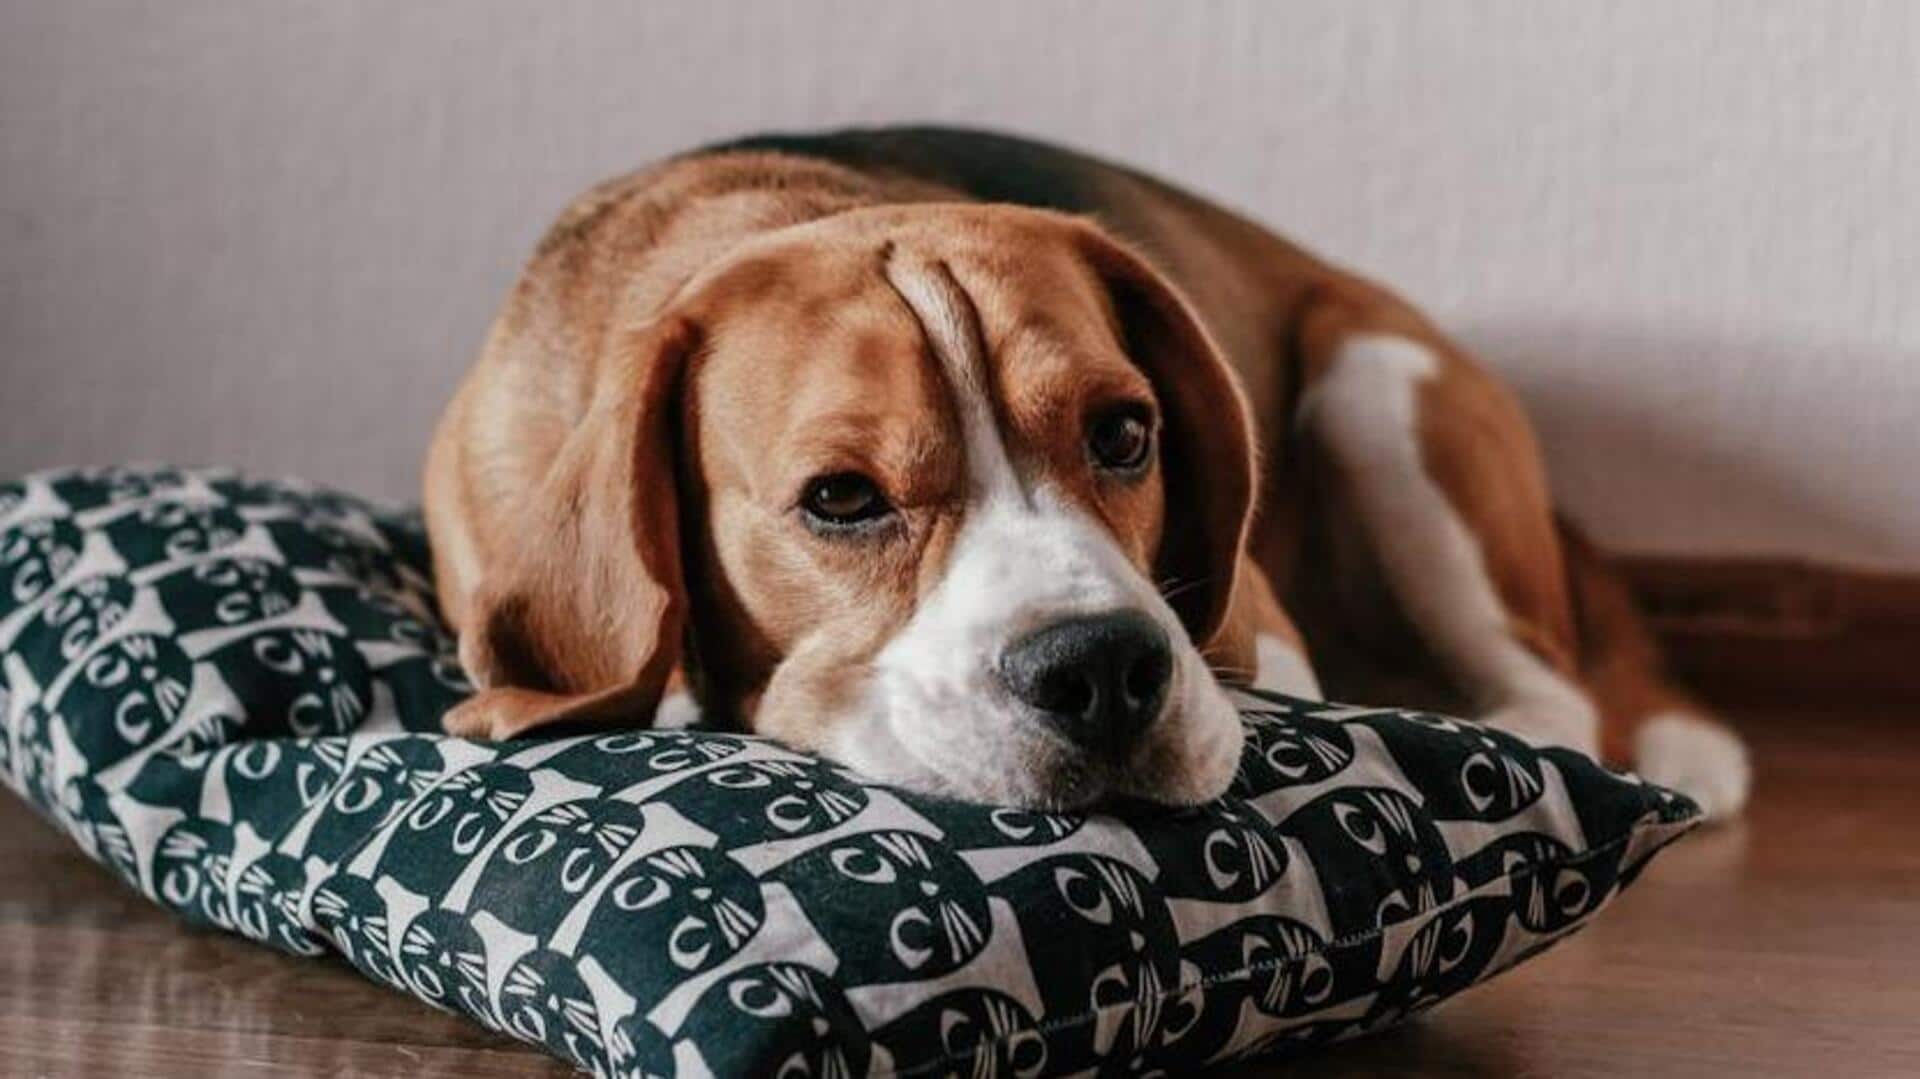 Keep your Beagle fit with this exercise routine